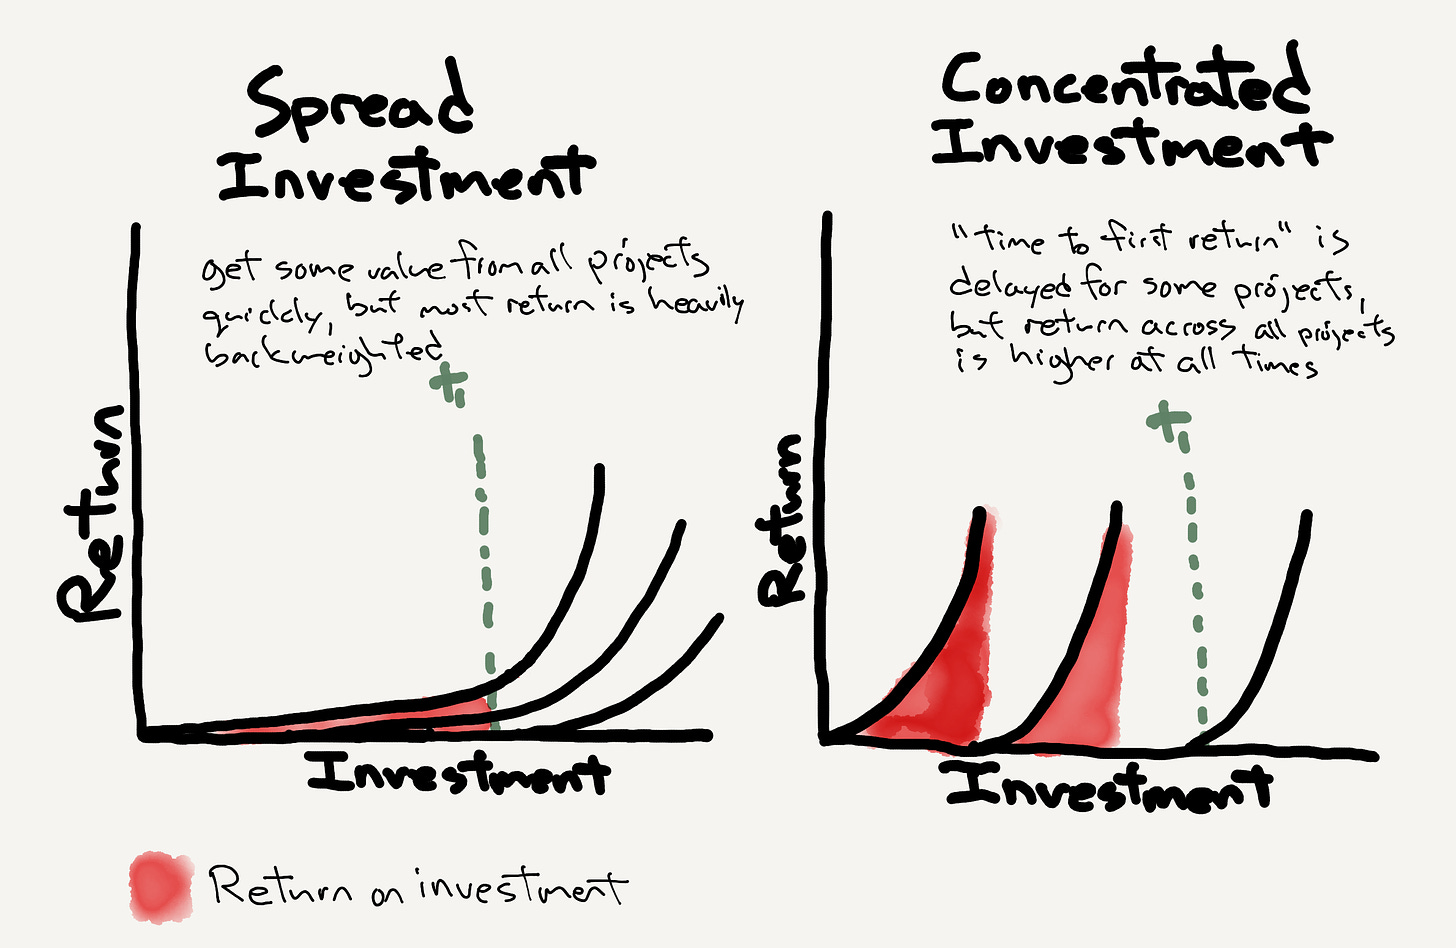 Two graphs showing that consolidating efforts delivers more results across all time frames than spreading them thing.